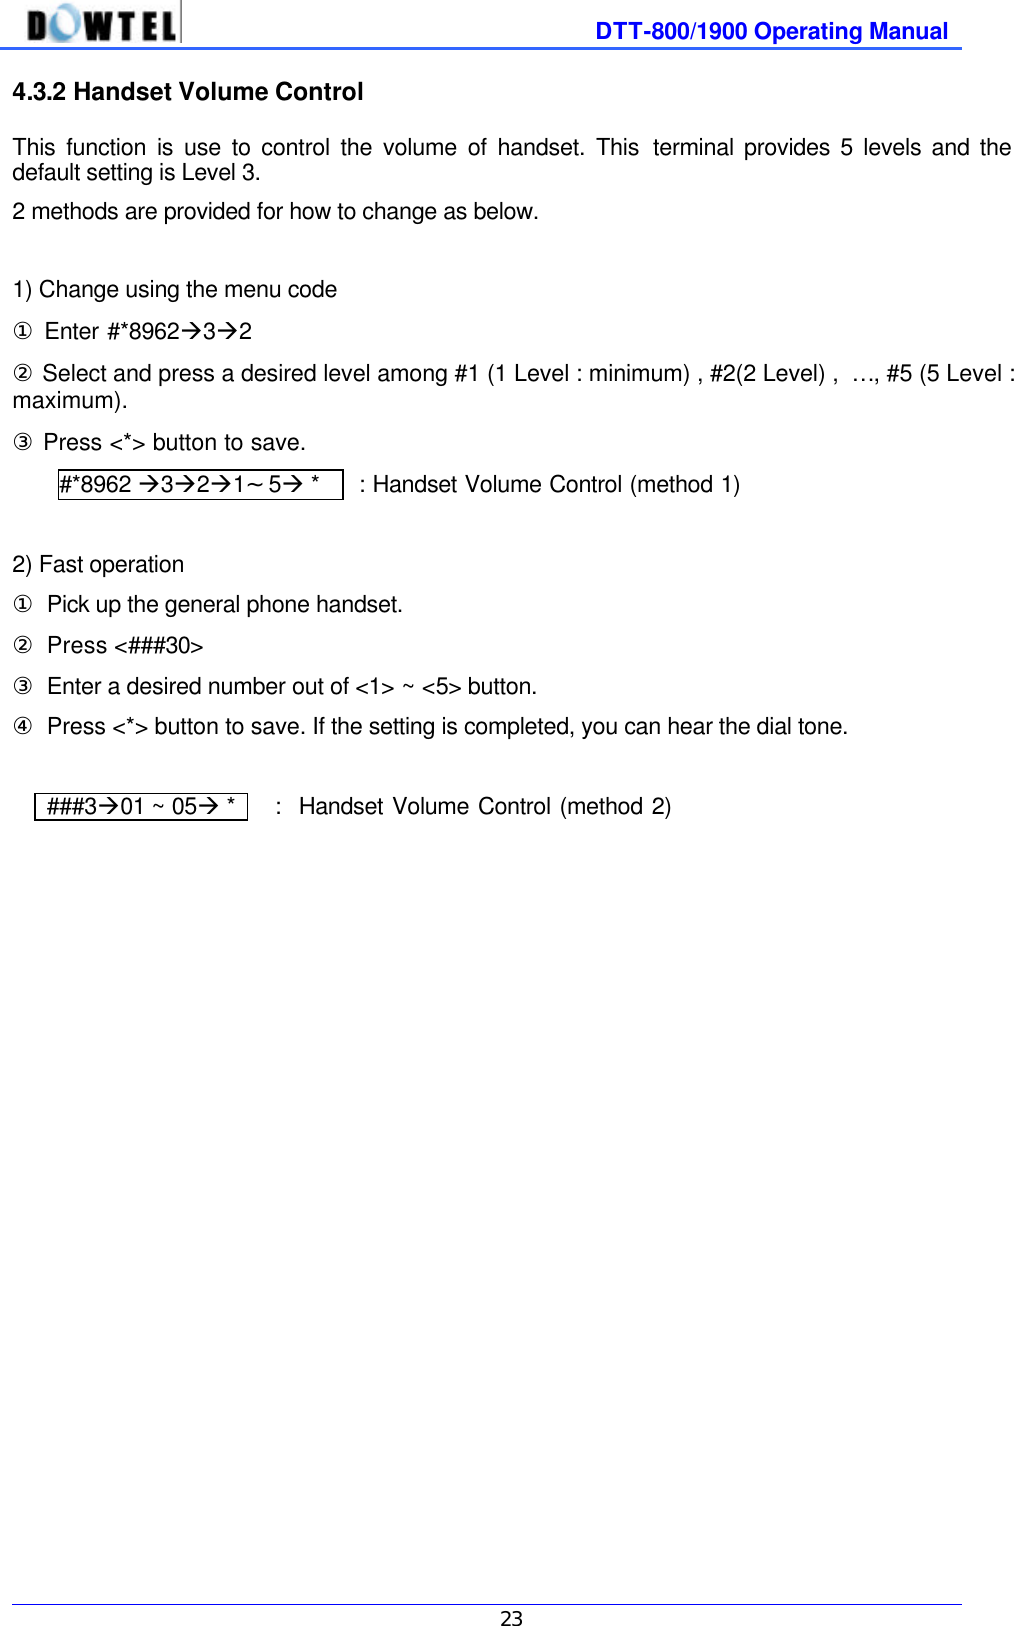              DTT-800/1900 Operating Manual   23 4.3.2 Handset Volume Control   This function is use to control the volume of handset. This terminal provides 5 levels and the default setting is Level 3. 2 methods are provided for how to change as below.  1) Change using the menu code ① Enter #*8962à3à2   ② Select and press a desired level among #1 (1 Level : minimum) , #2(2 Level) ,  … , #5 (5 Level : maximum).   ③ Press &lt;*&gt; button to save. #*8962 à3à2à1～5à *    : Handset Volume Control (method 1)  2) Fast operation ① Pick up the general phone handset. ② Press &lt;###30&gt; ③ Enter a desired number out of &lt;1&gt; ~ &lt;5&gt; button.   ④ Press &lt;*&gt; button to save. If the setting is completed, you can hear the dial tone.       ###3à01 ~ 05à *    :  Handset Volume Control (method 2)    